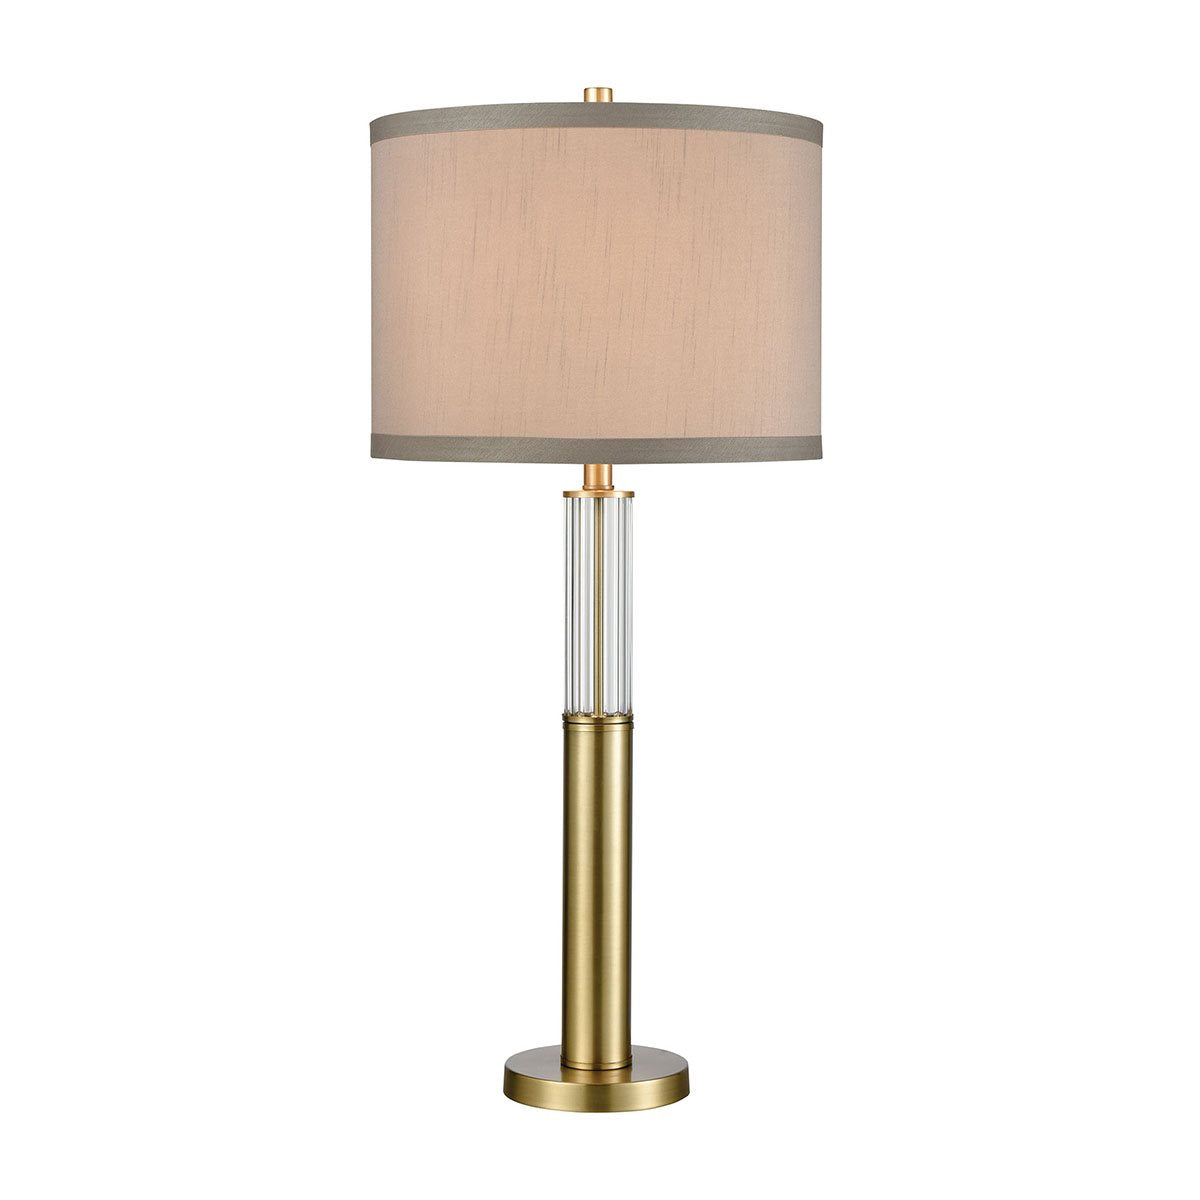 Stein World Cannery Row Table Lamp Brass 77142